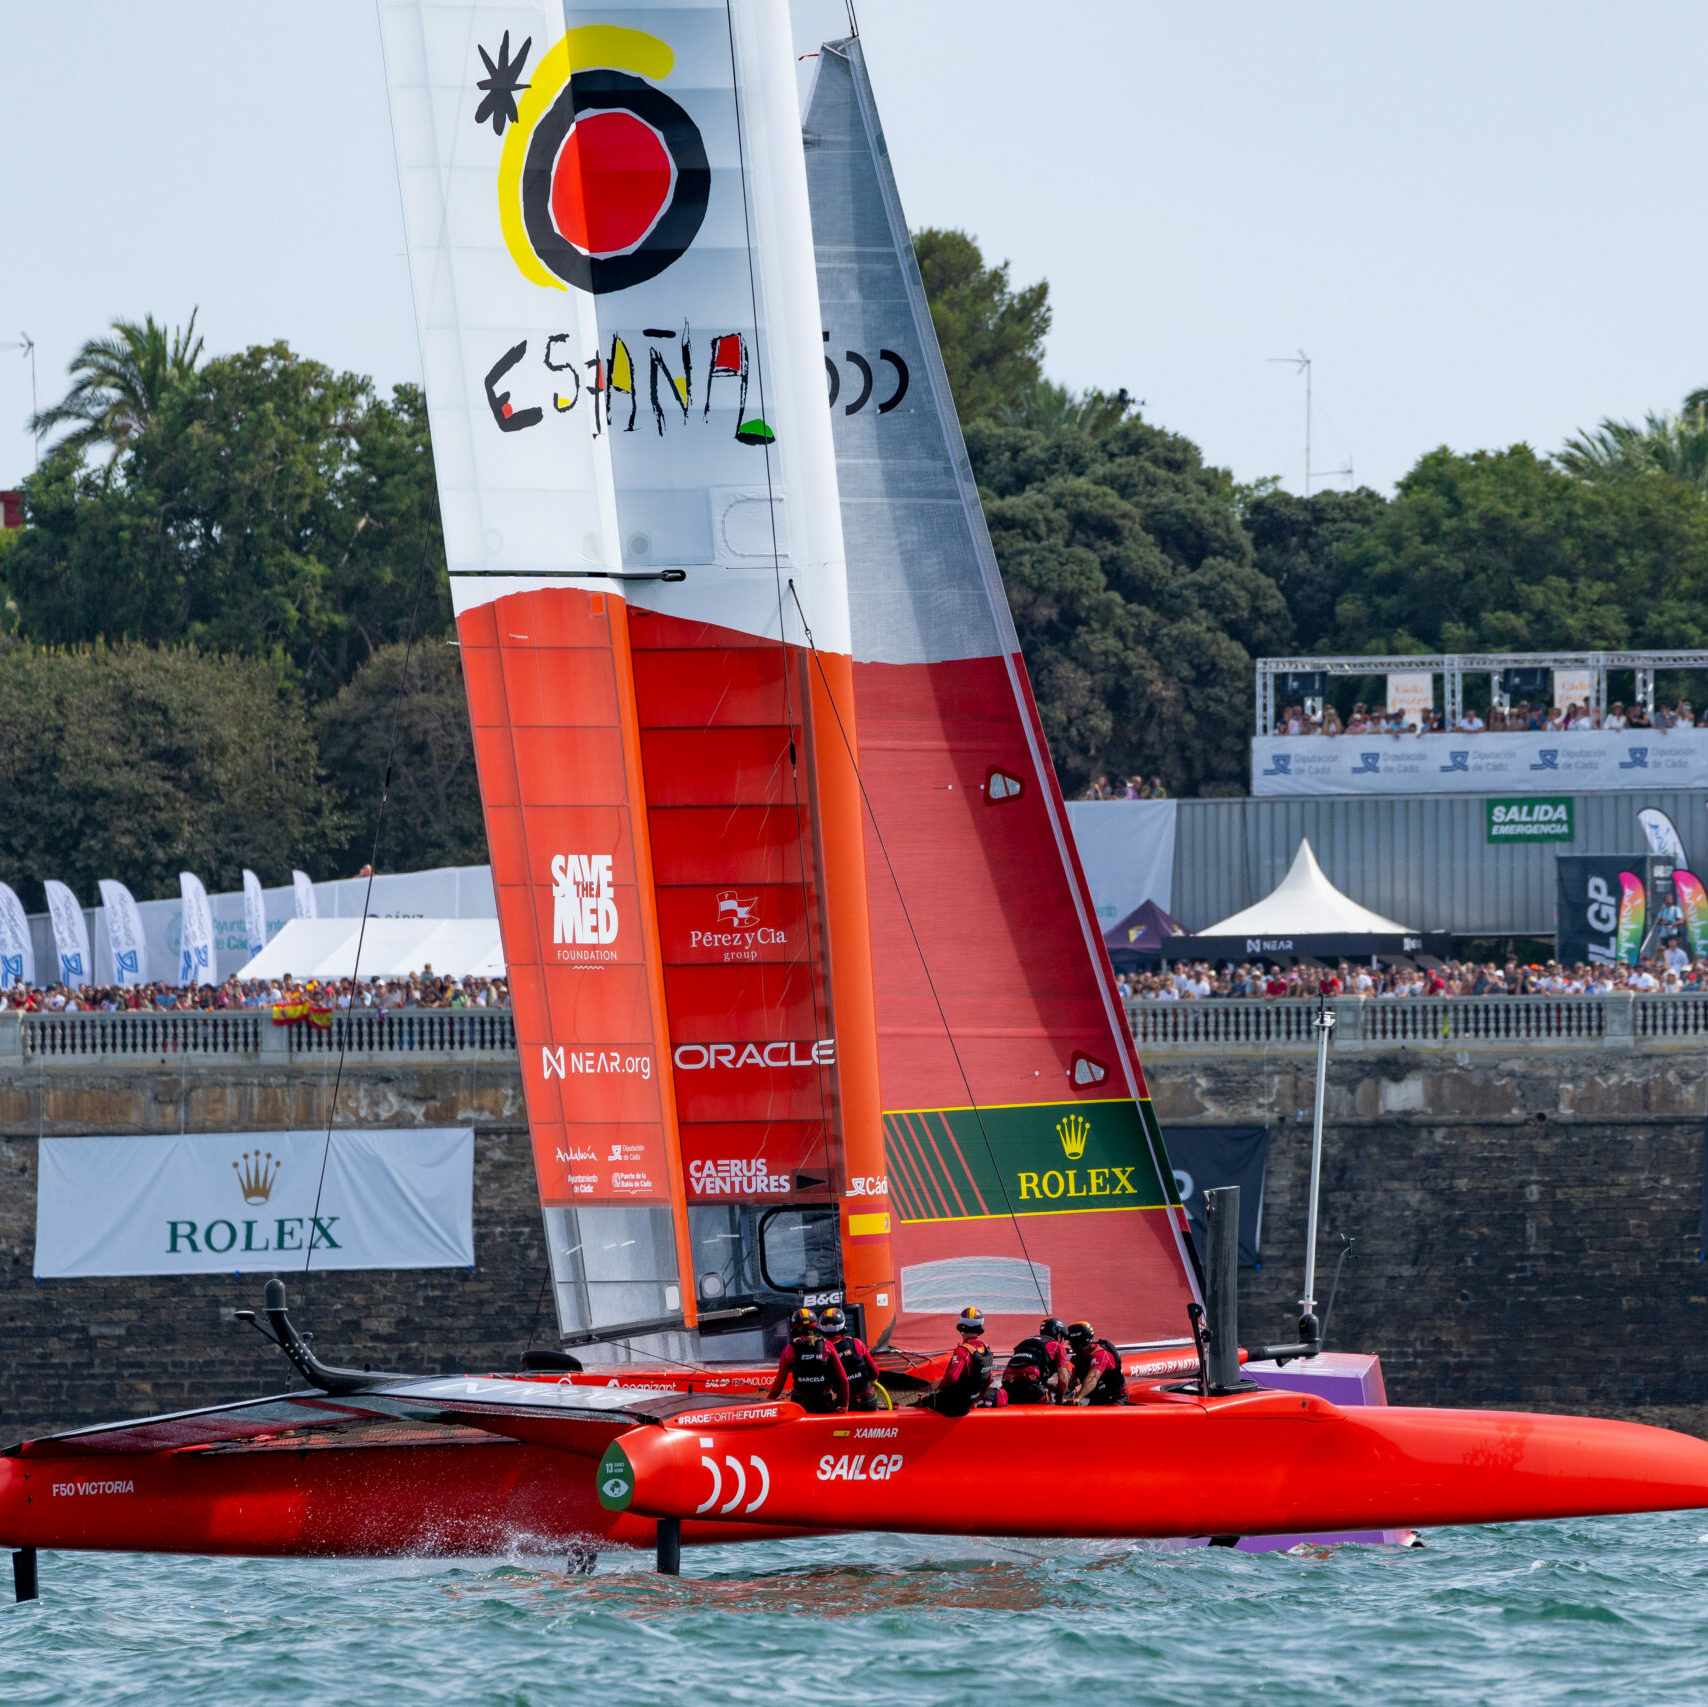 Spain SailGP Team helmed by Jordi Xammar on Race Day 2 of the Spain Sail Grand Prix in Cadiz, Andalusia, Spain. 25th September 2022. Photo: Bob Martin for SailGP. Handout image supplied by SailGP